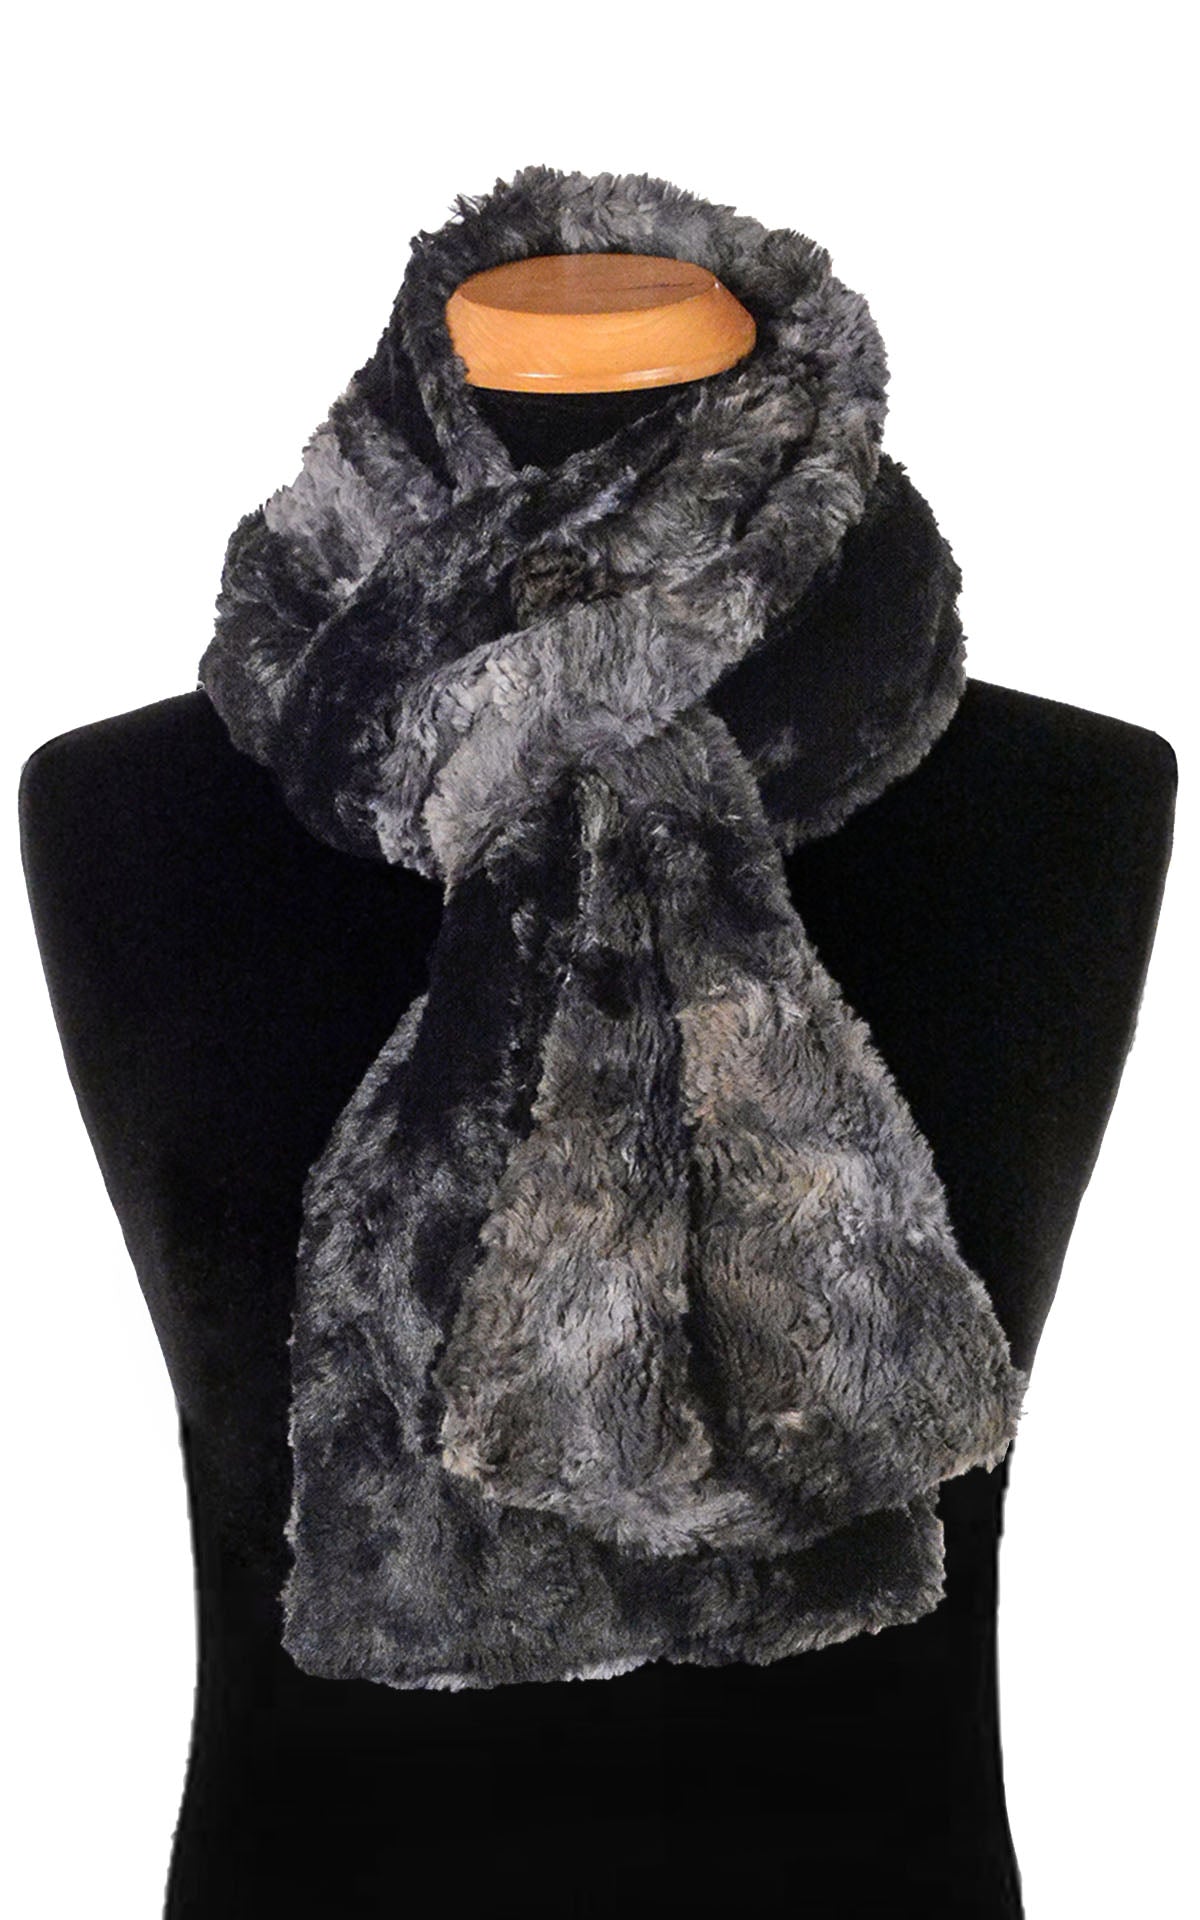 Women outside wearing a Rowdie style slouchy knit hat, fingerless gloves and Classic Scarf | Highland in Skye faux fur tie dye navy grays and blues| Handmade by Pandemonium Millinery Seattle, WA USA